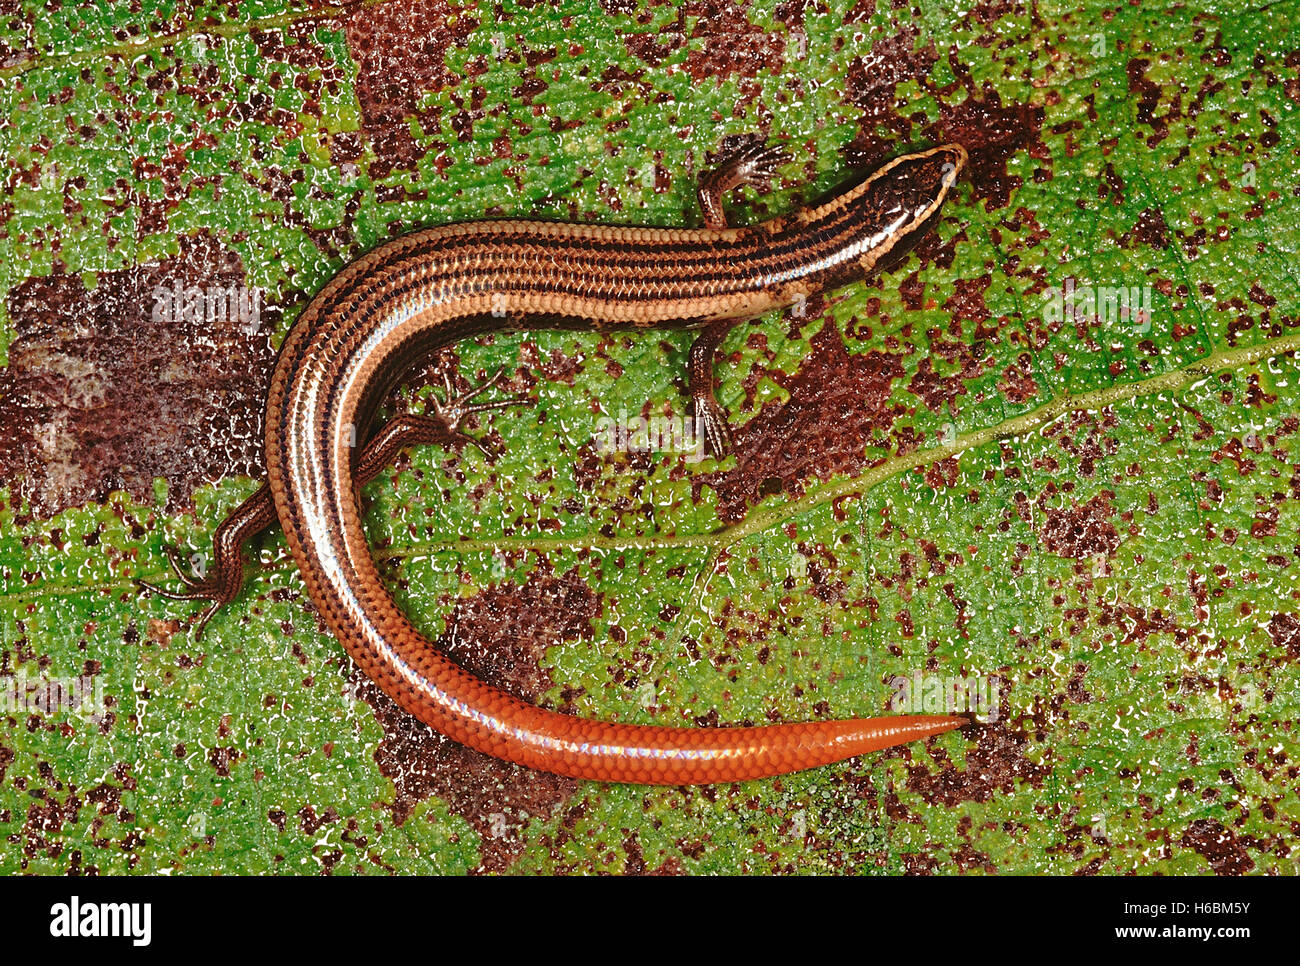 A skink resembling Riopa. The body of this species is shorter and the tail is brightly coloured. Stock Photo